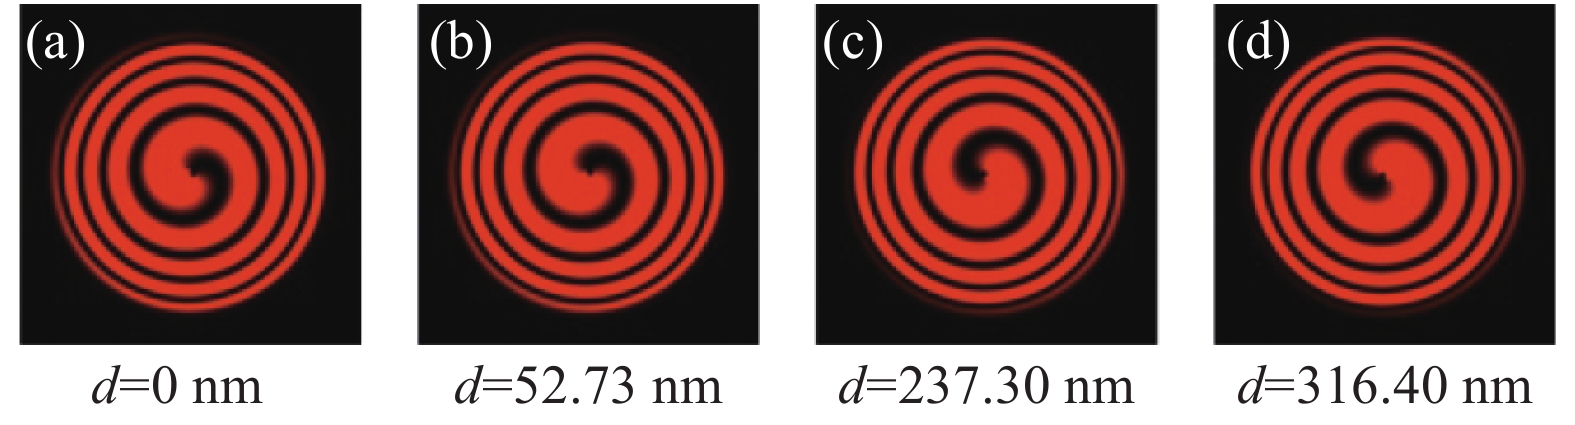 Interference intensity of vortex beams and spherical wave before and after micro-displacement in the simulation